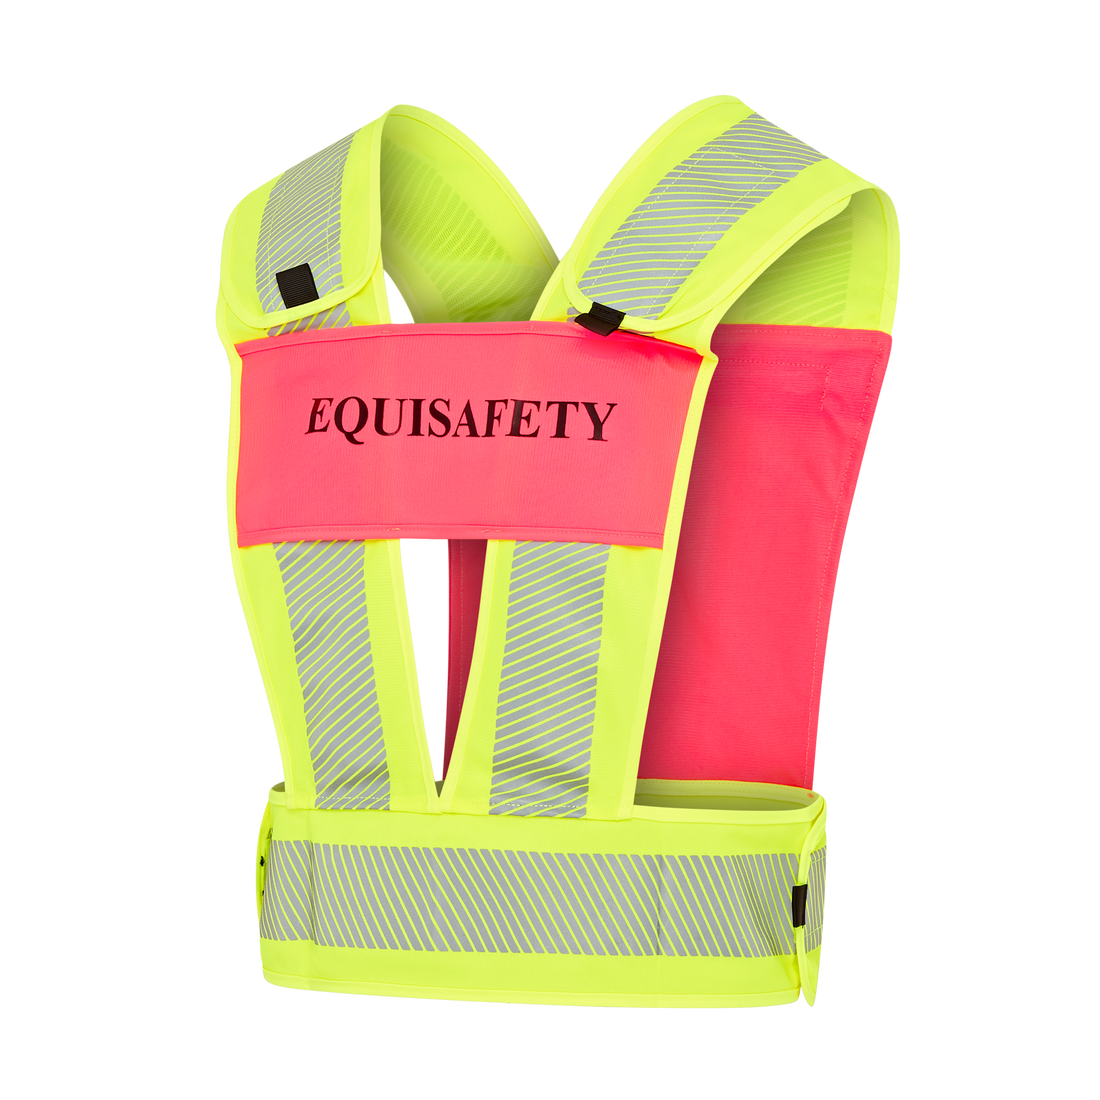 Adjustable Reflective Harness with pocket - PINK/YELLOW